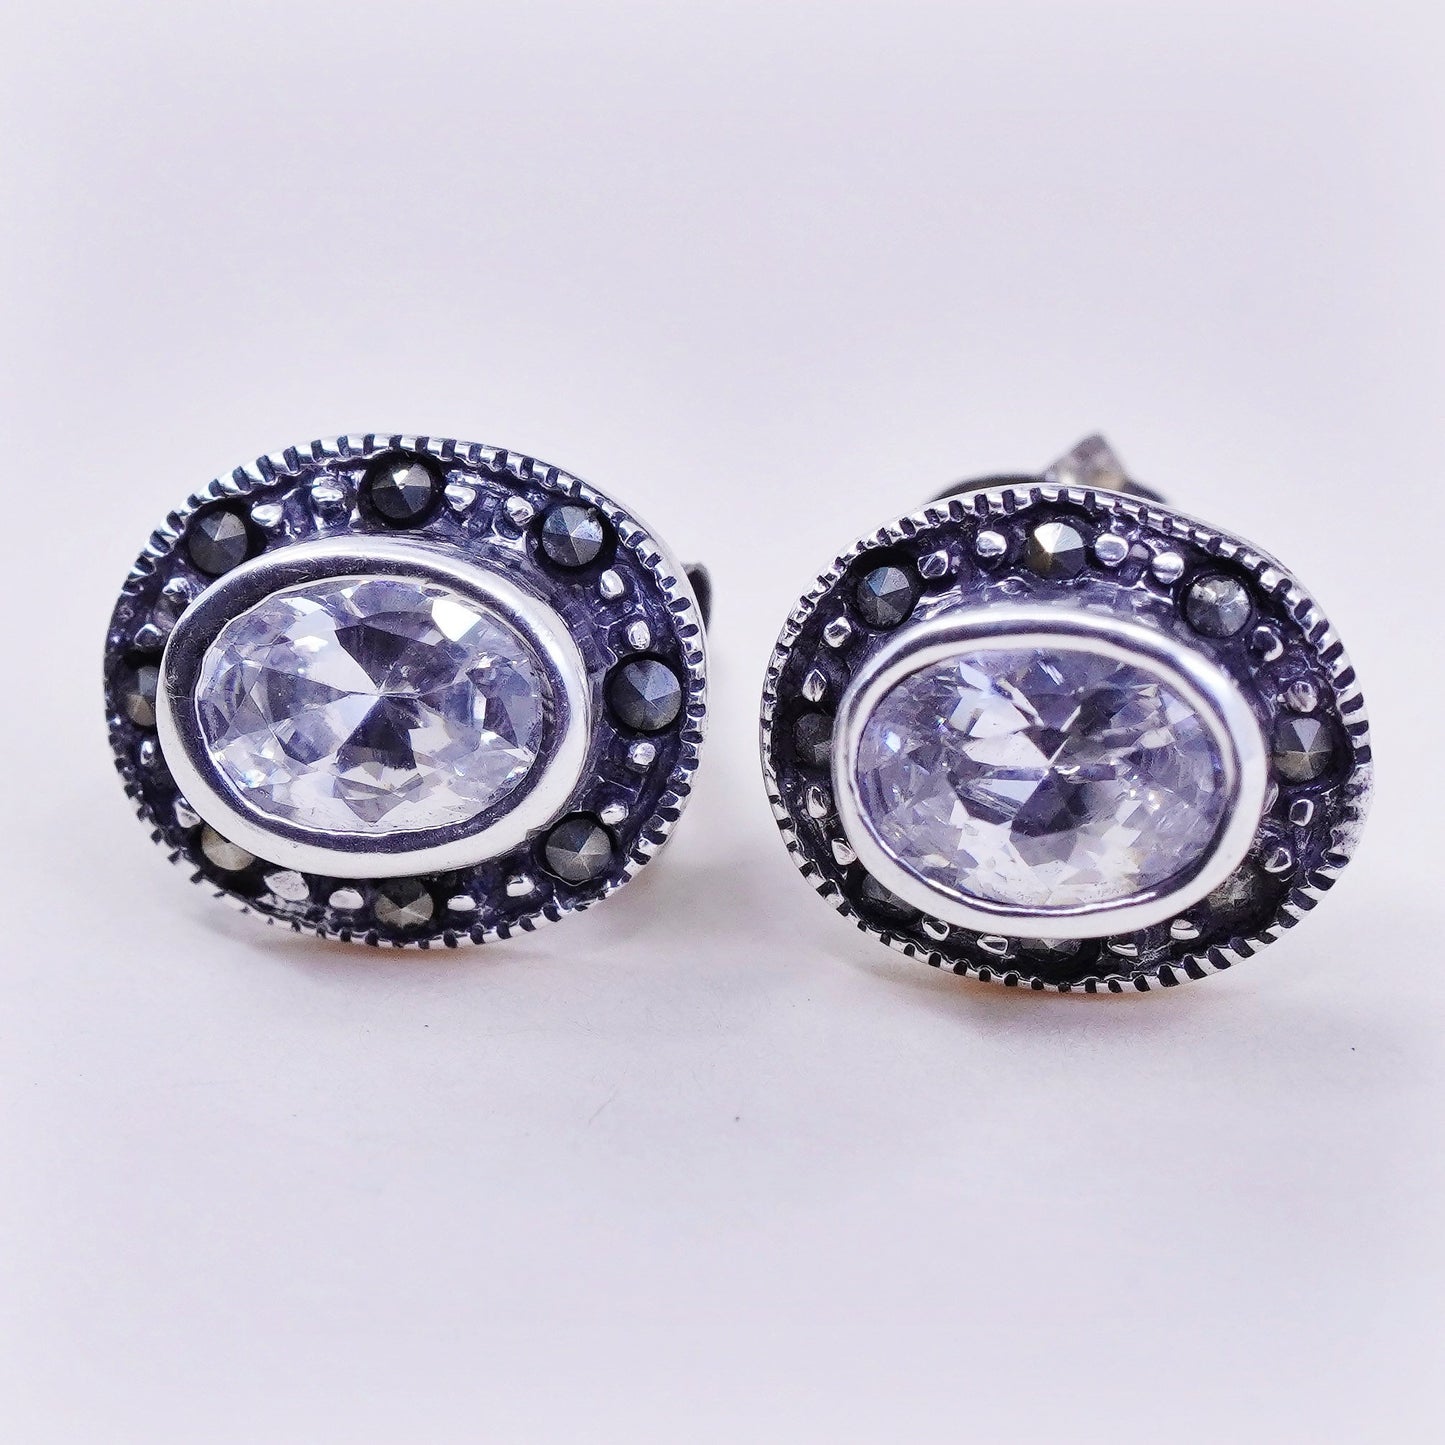 Vintage Sterling silver handmade earrings, 925 oval studs with Cz and marcasite